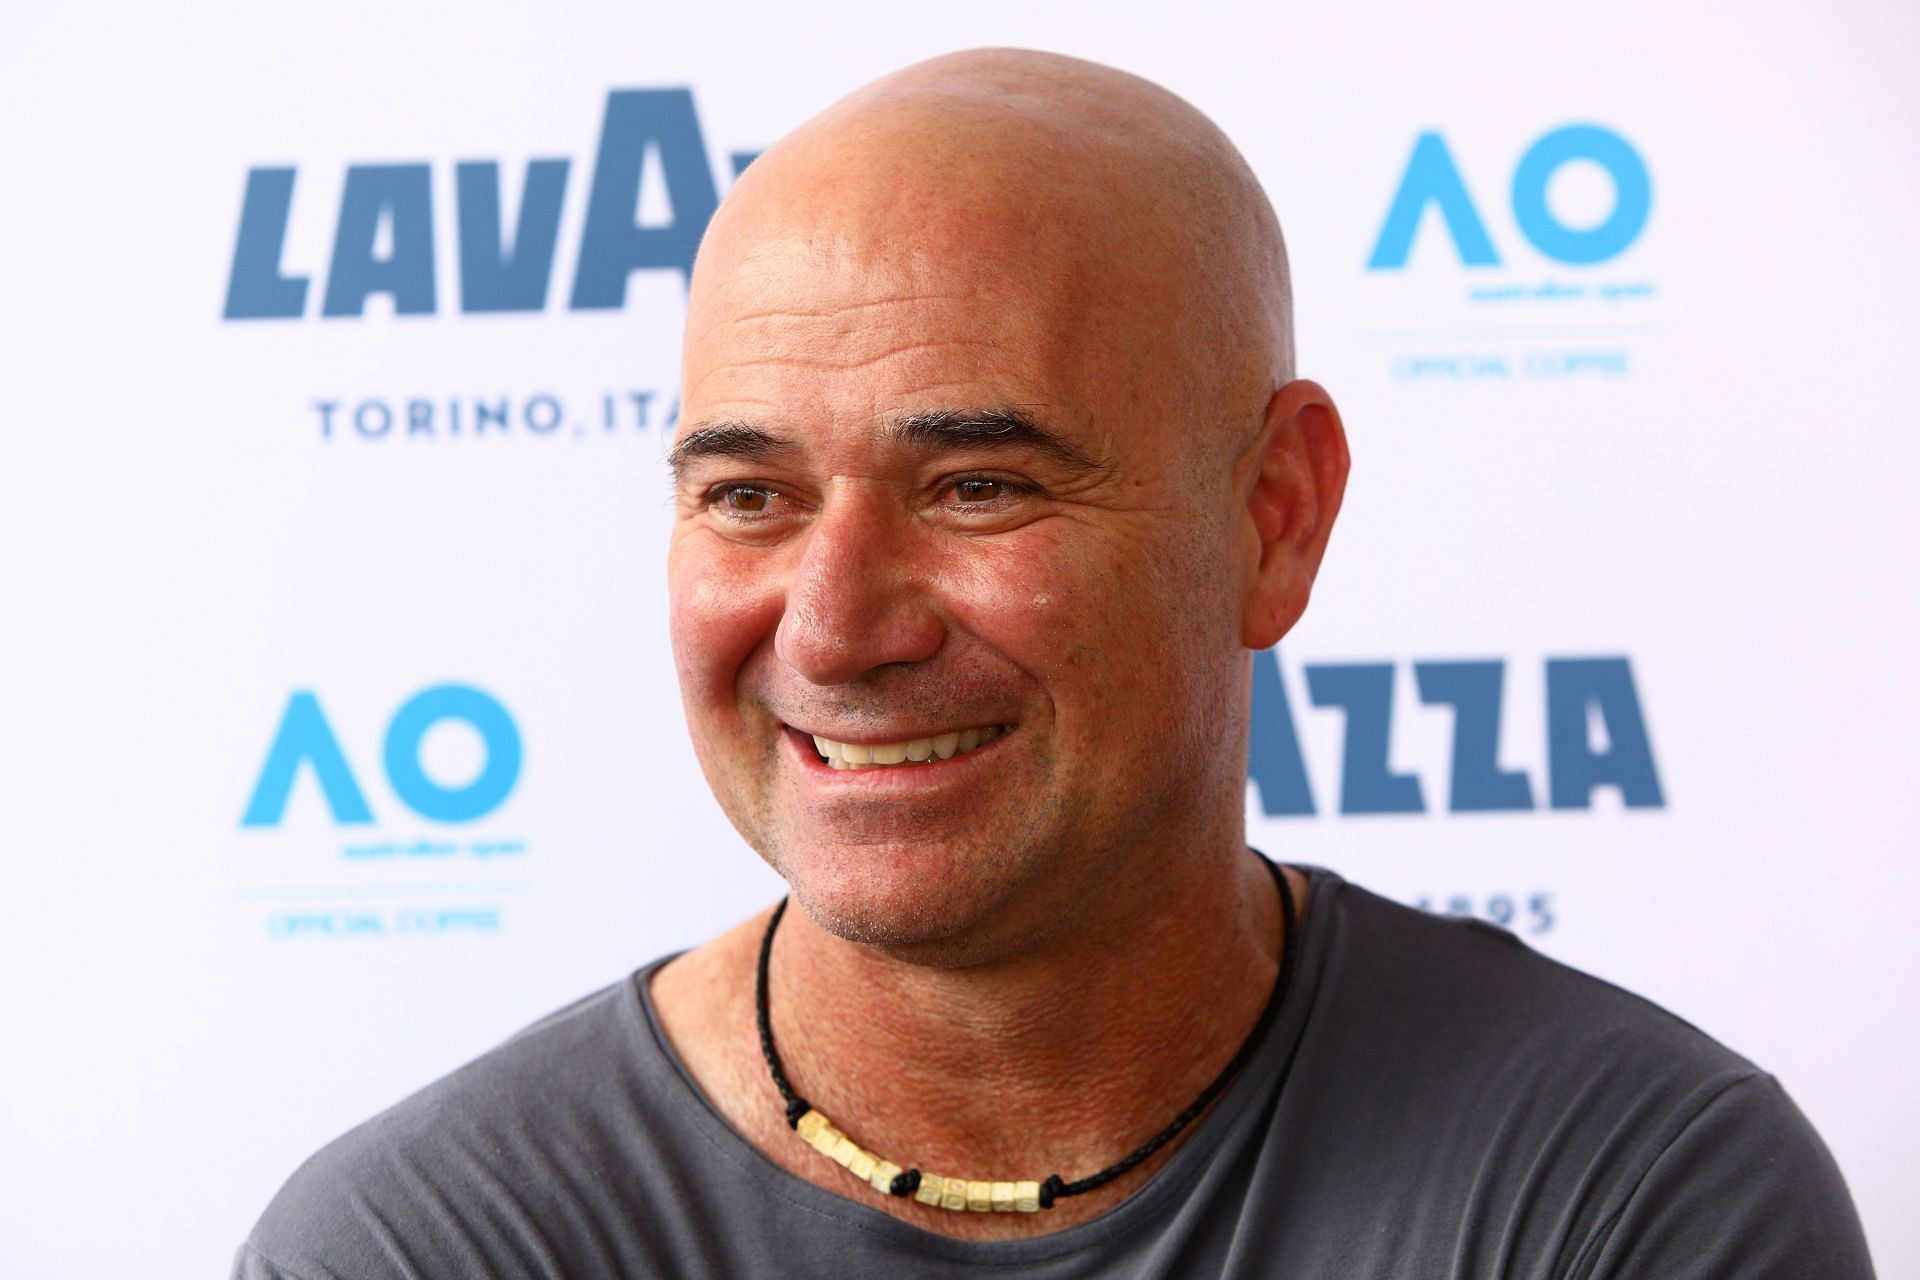 Andre Agassi Off Court At The 2019 Australian Open